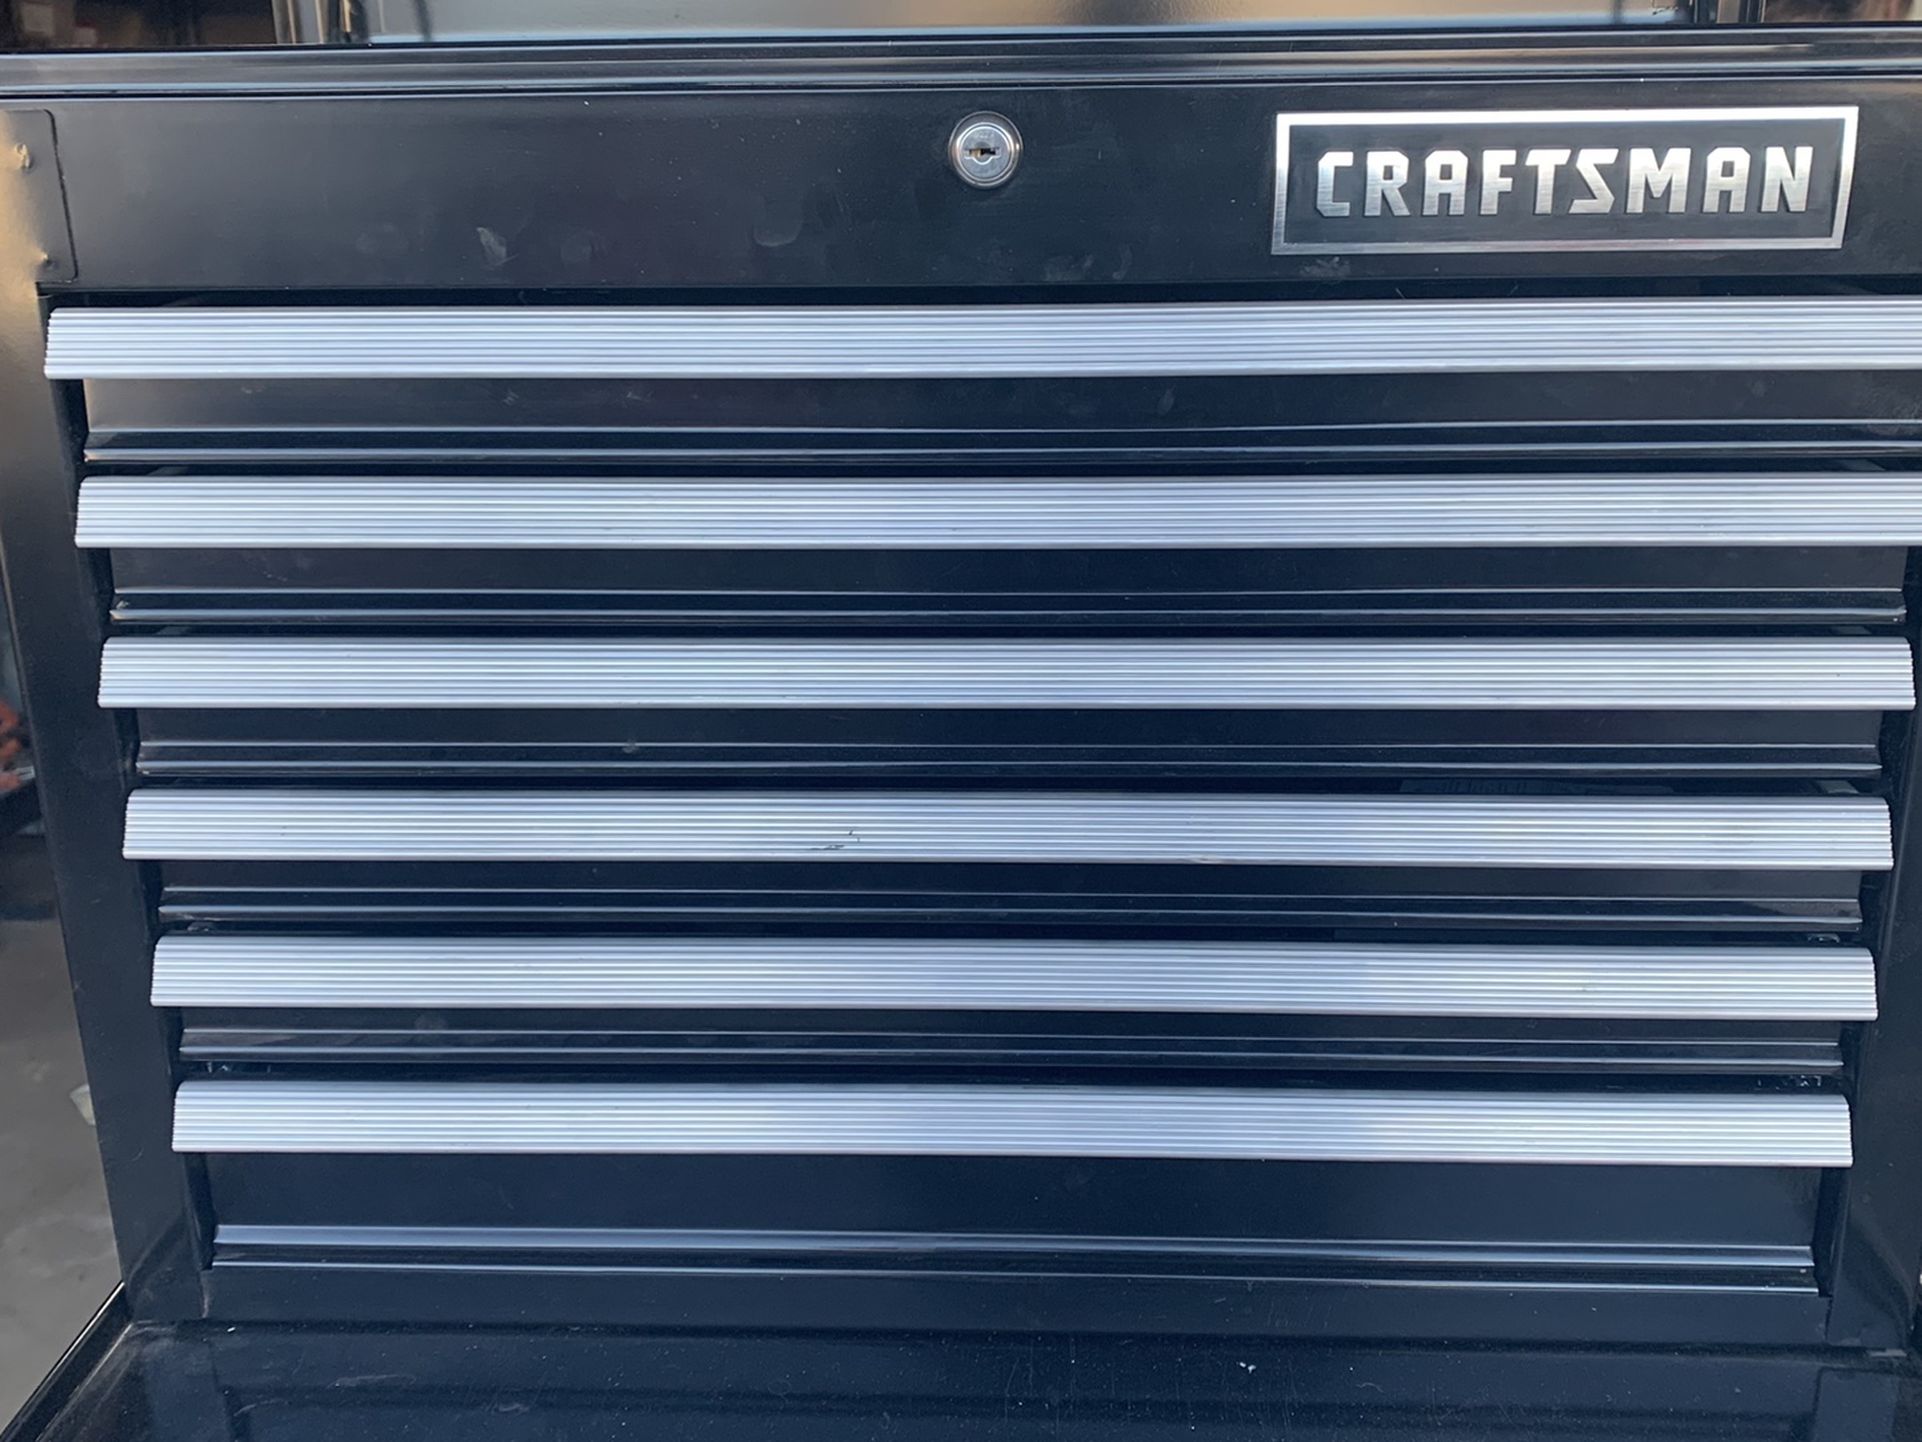 Craftsman toolbox mad in USA